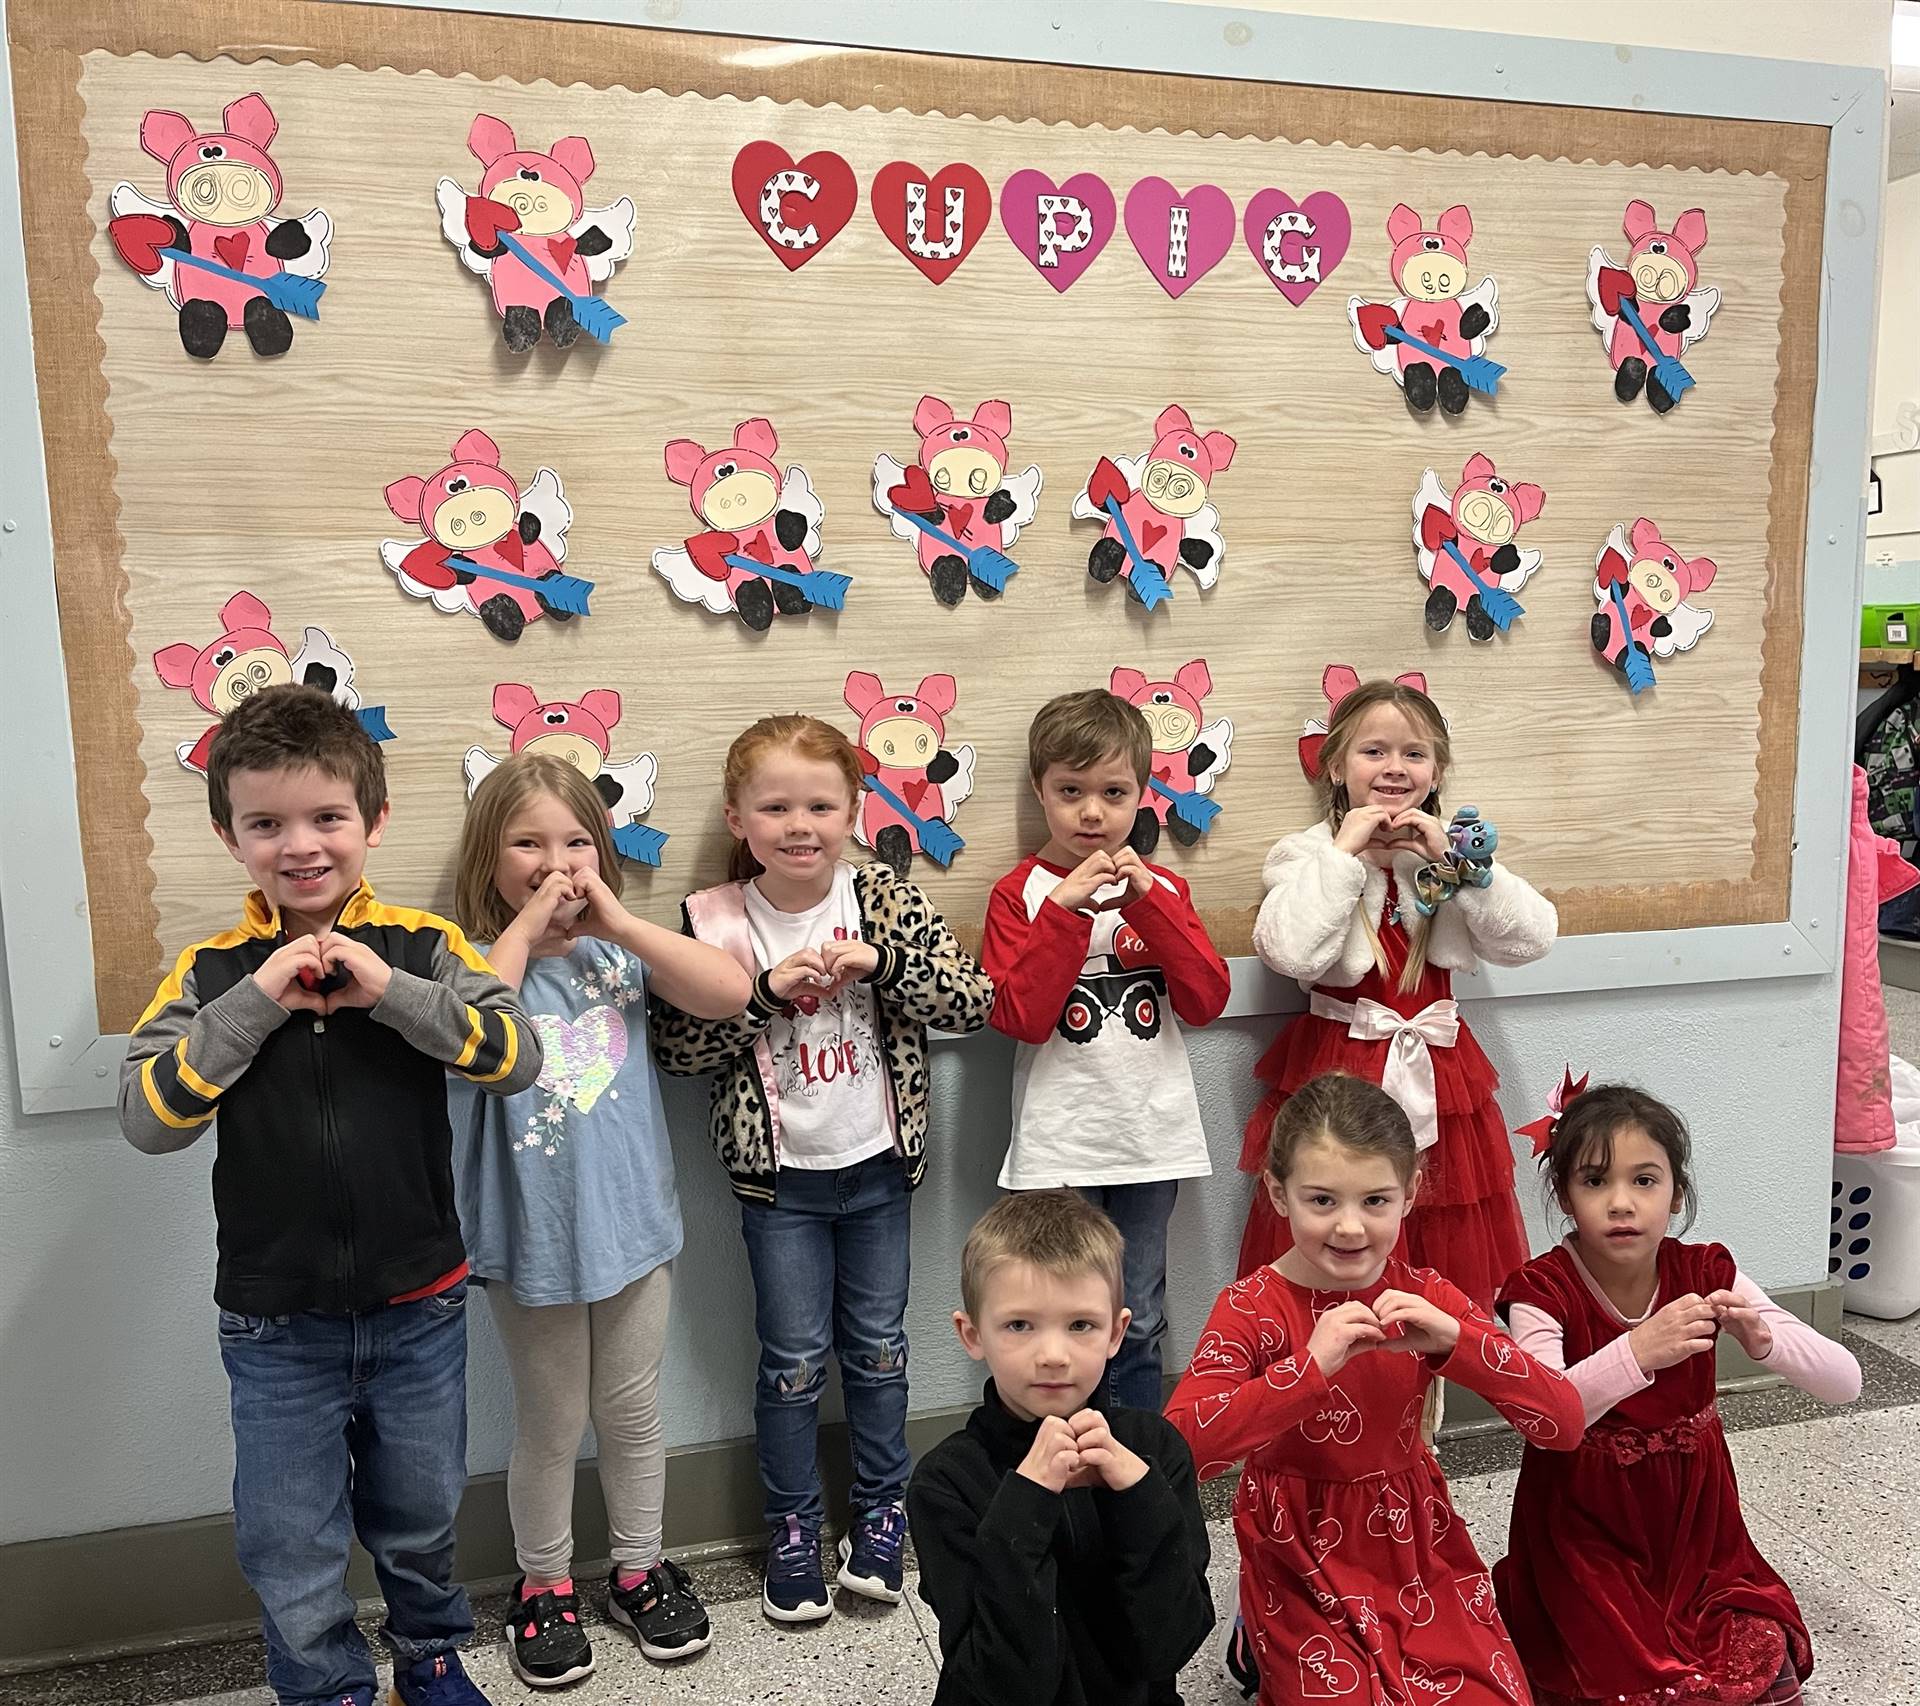 students making hearts with hands and "CUPIG" craft background.